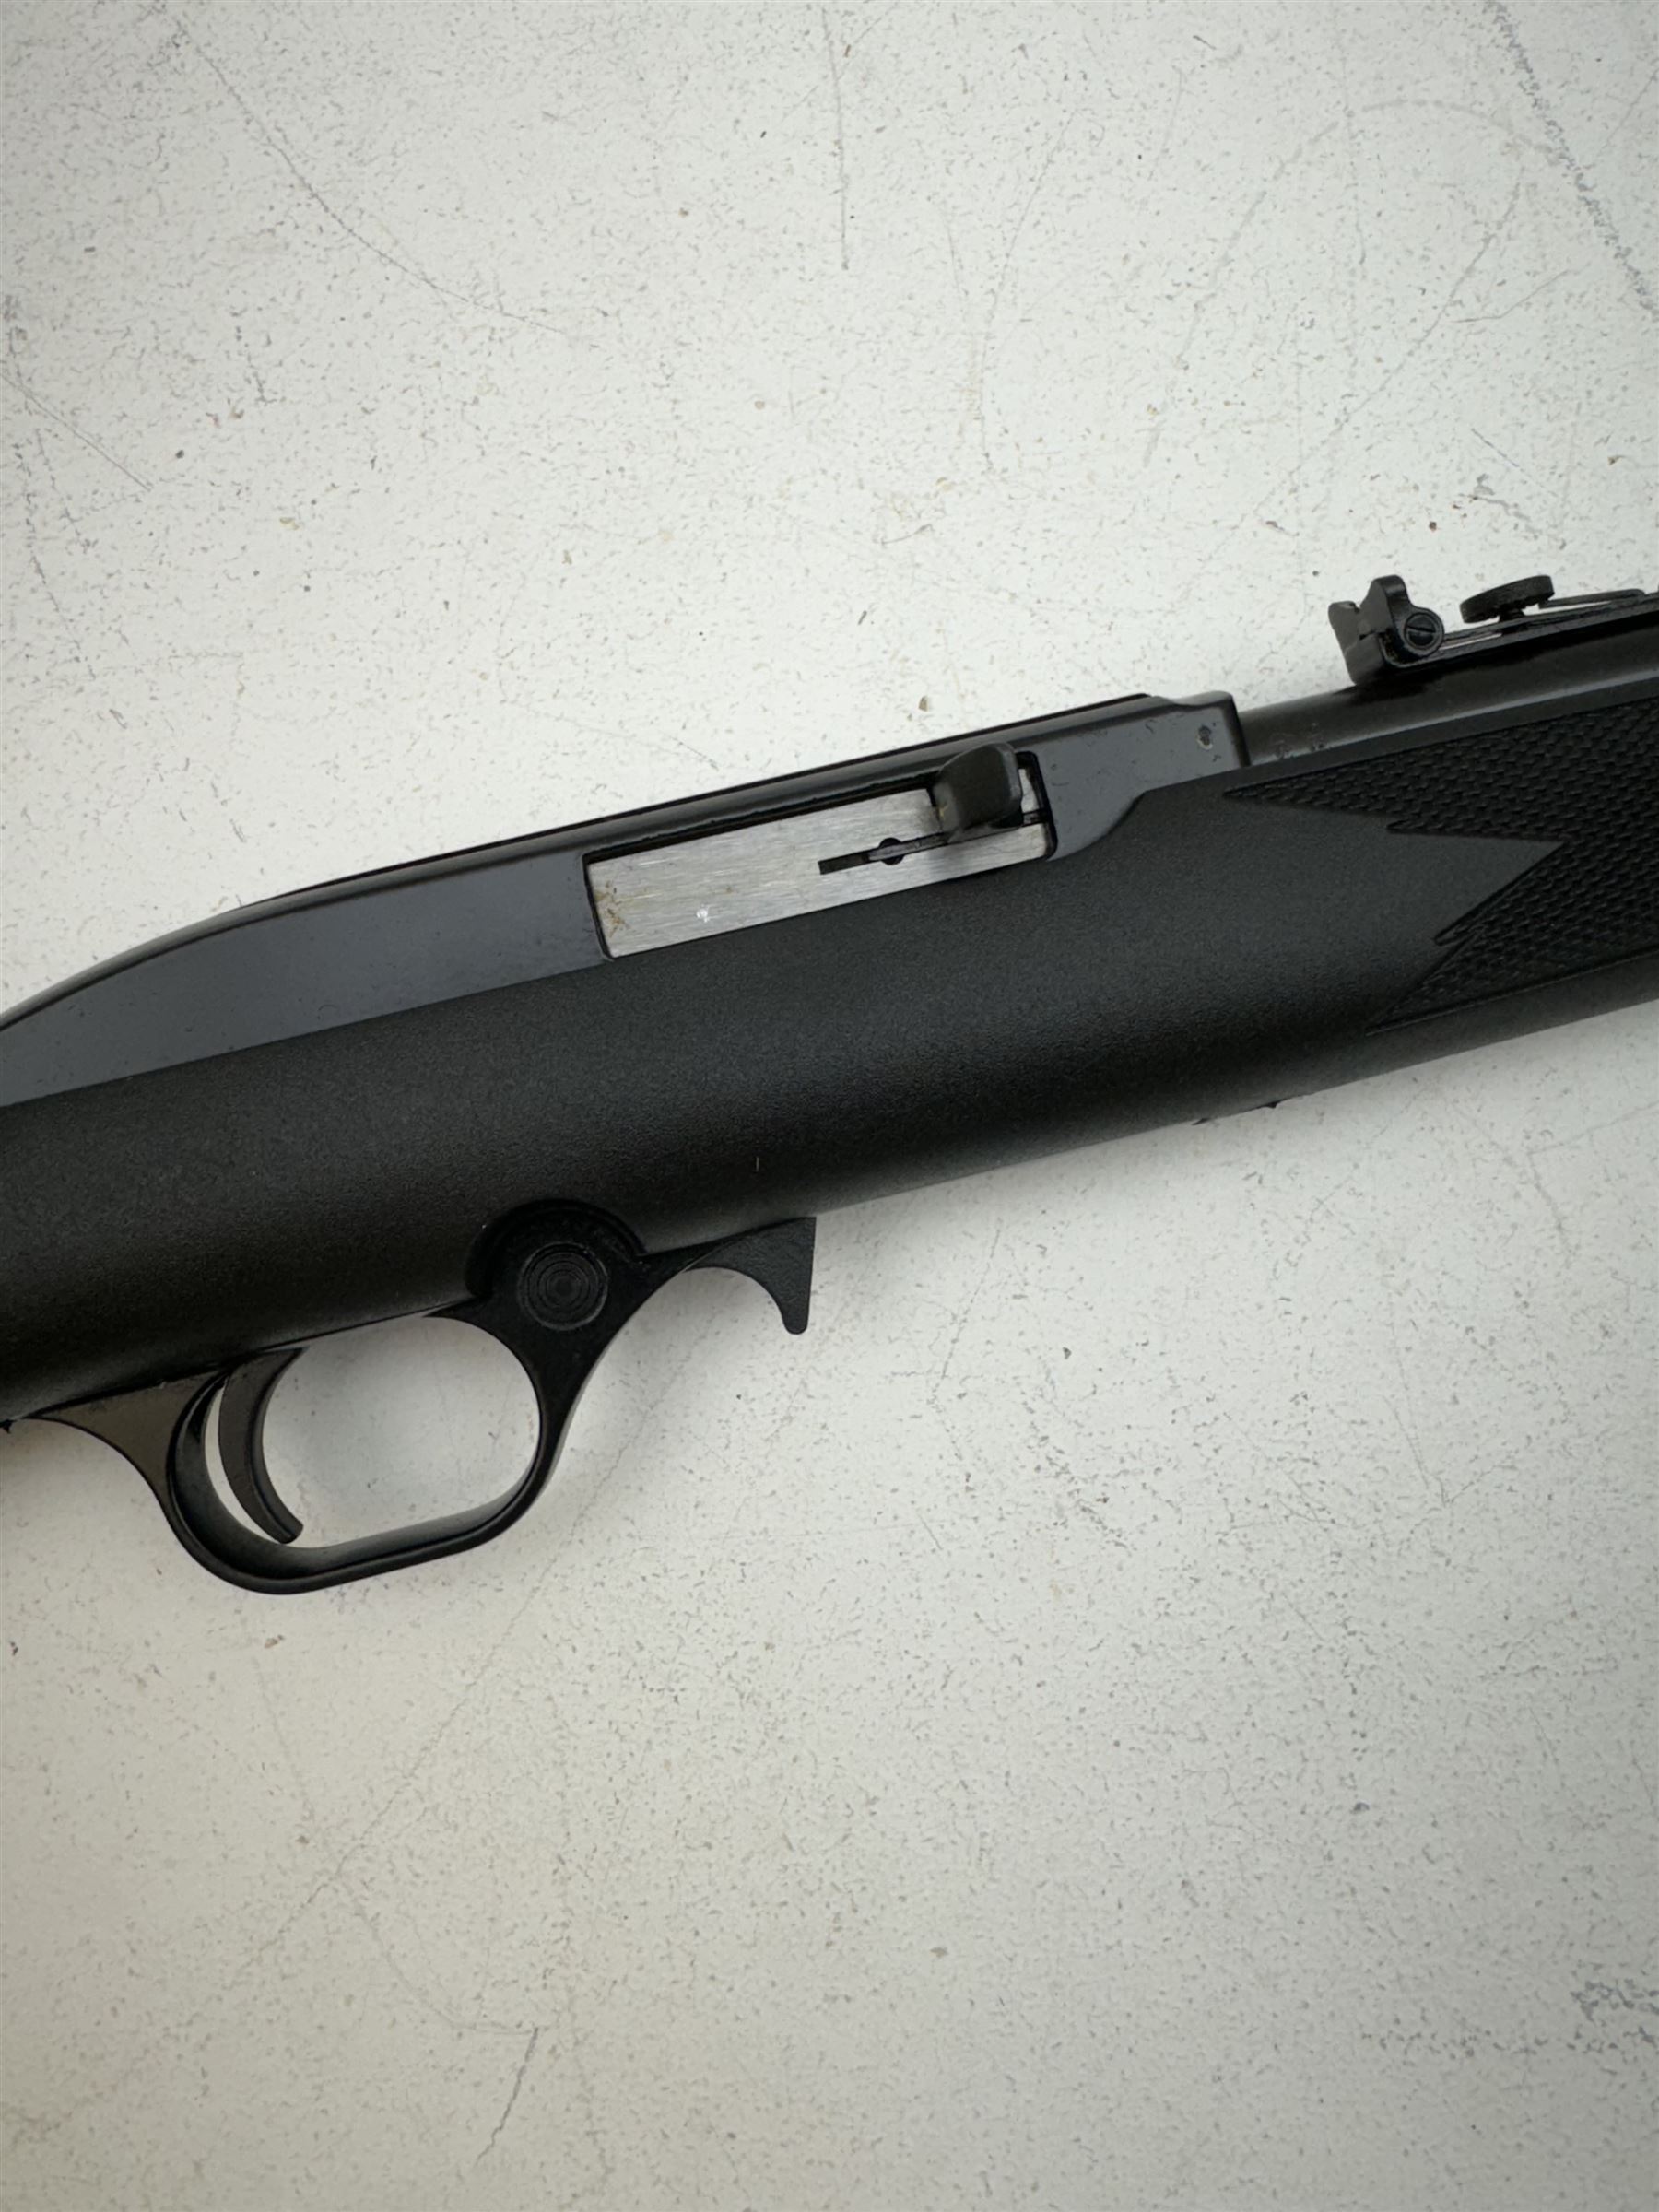 SECTION 1 FIREARMS CERTIFICATE REQUIRED - New Magtech MOD 7022 semi-auto .22 rifle 61cm (18") barrel - Image 3 of 15